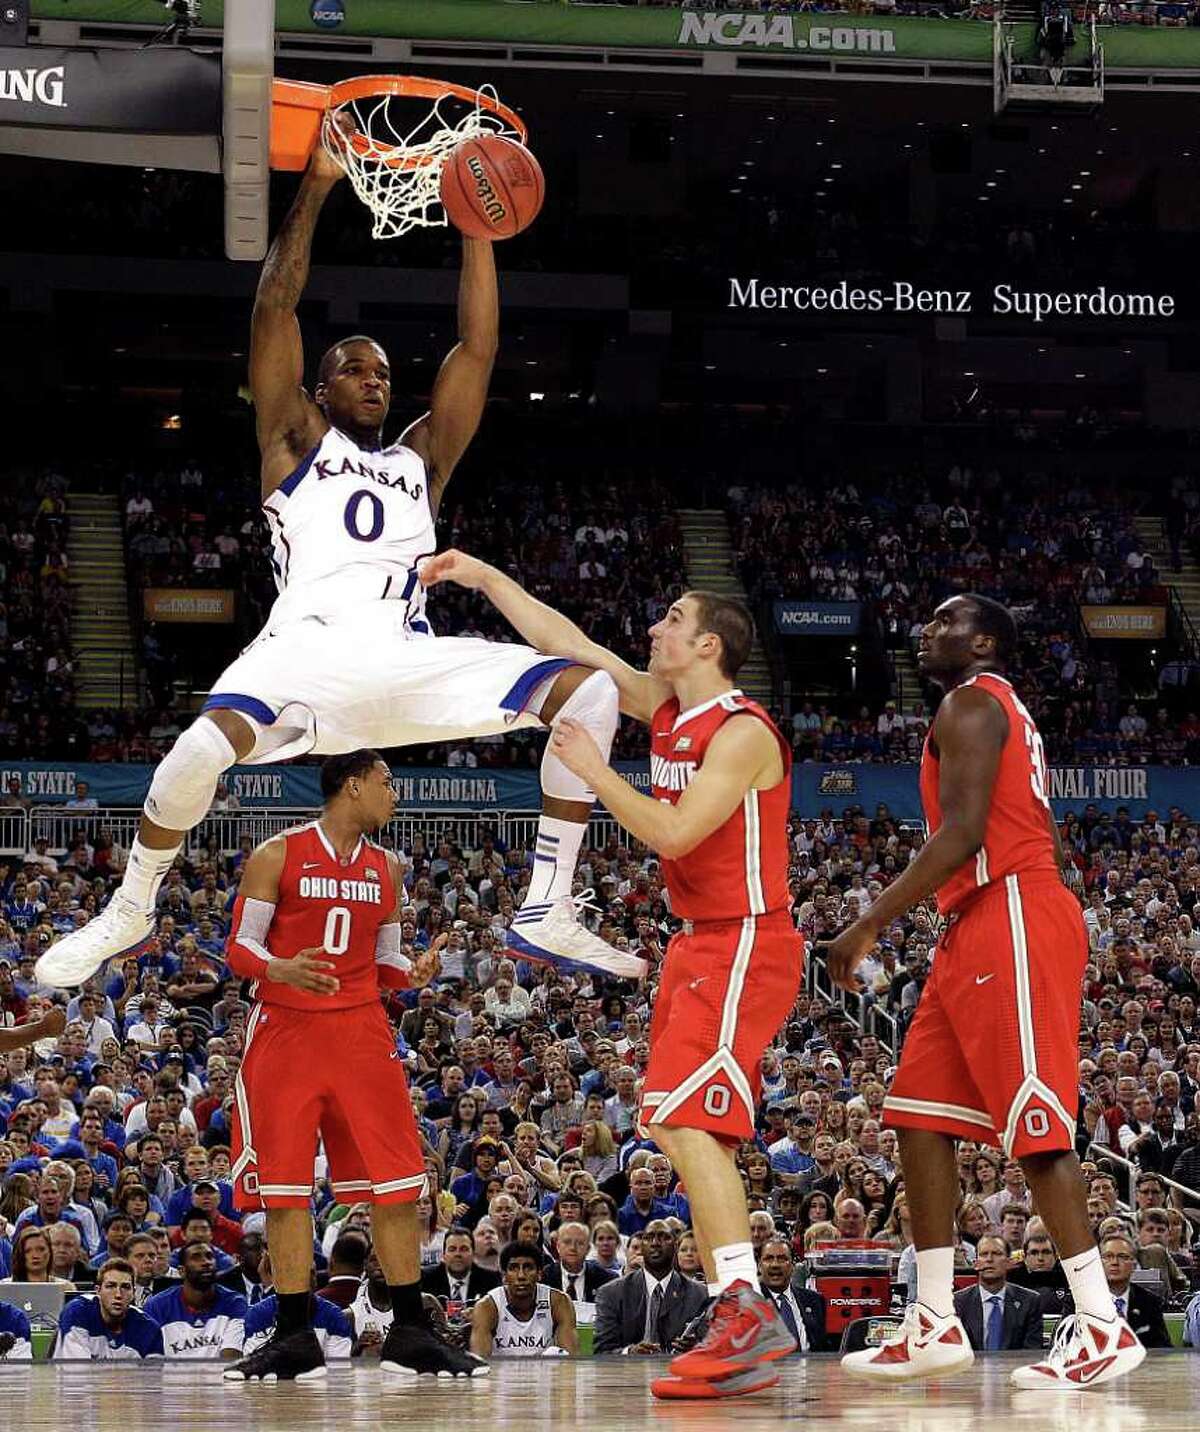 Thomas Robinson has been a major force inside for Kansas this season after playing just 14 minutes a game in 2010-11.